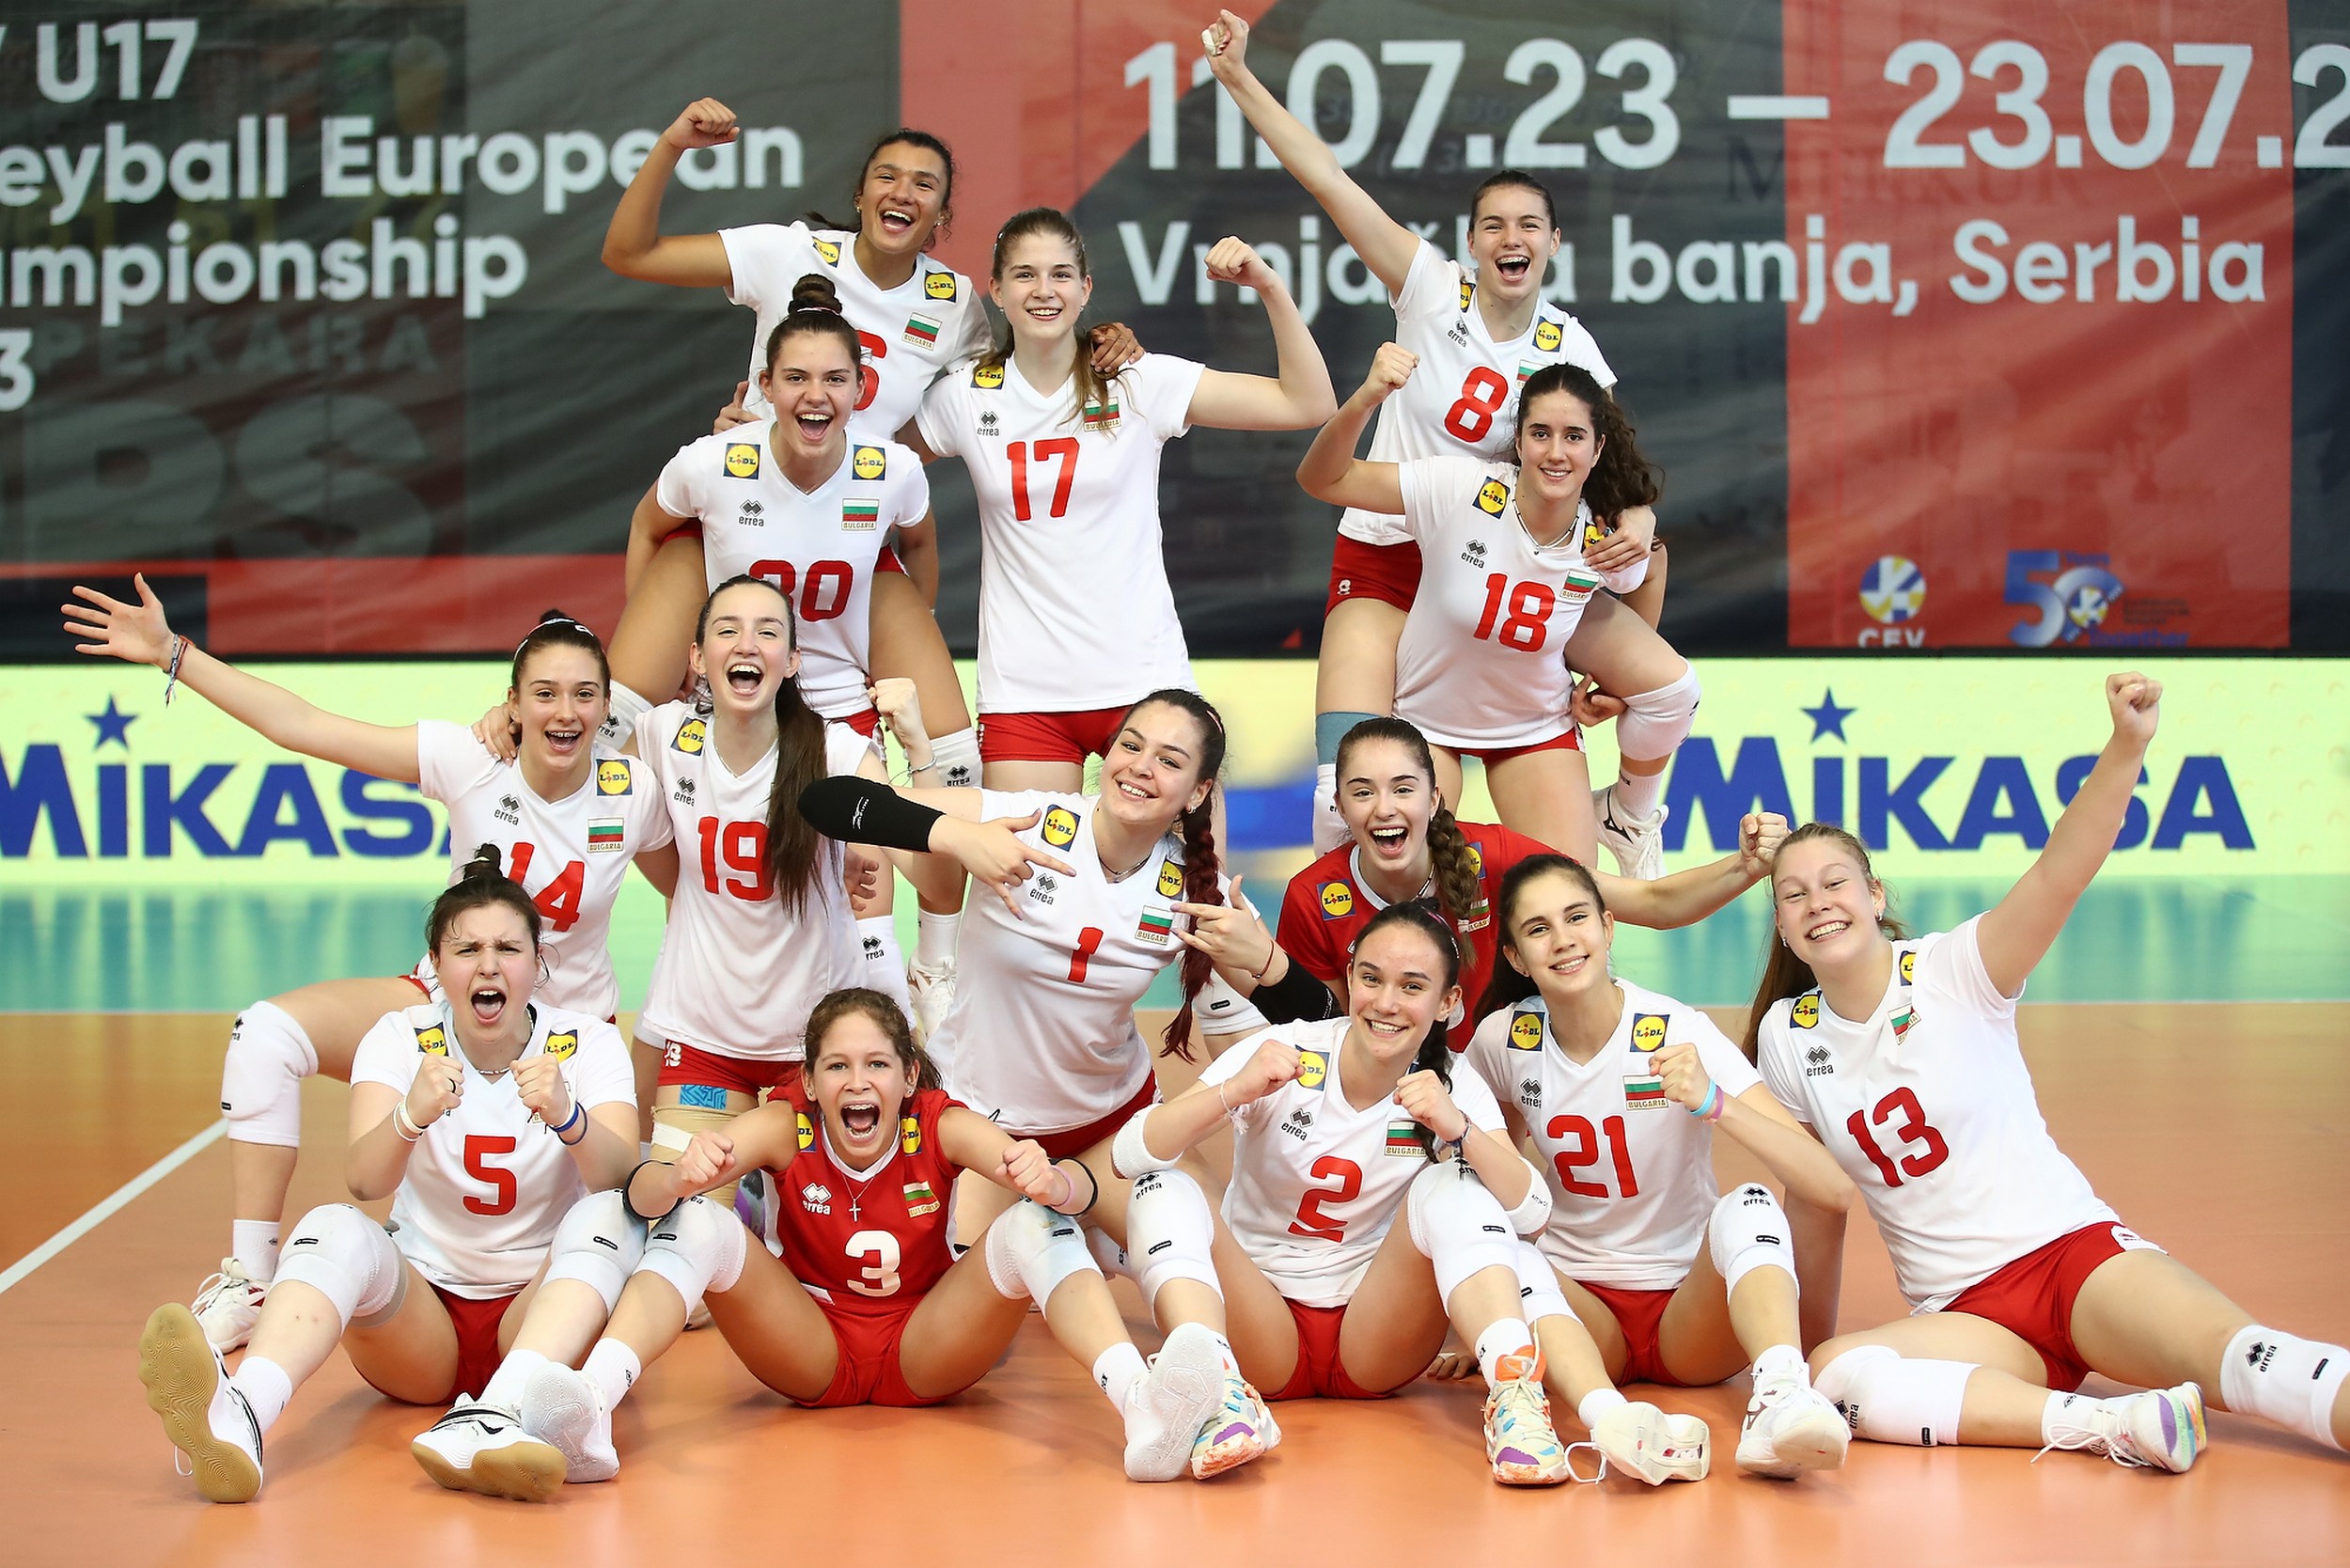 The U17 Women's European Championship gets Going in Serbia and Hungary